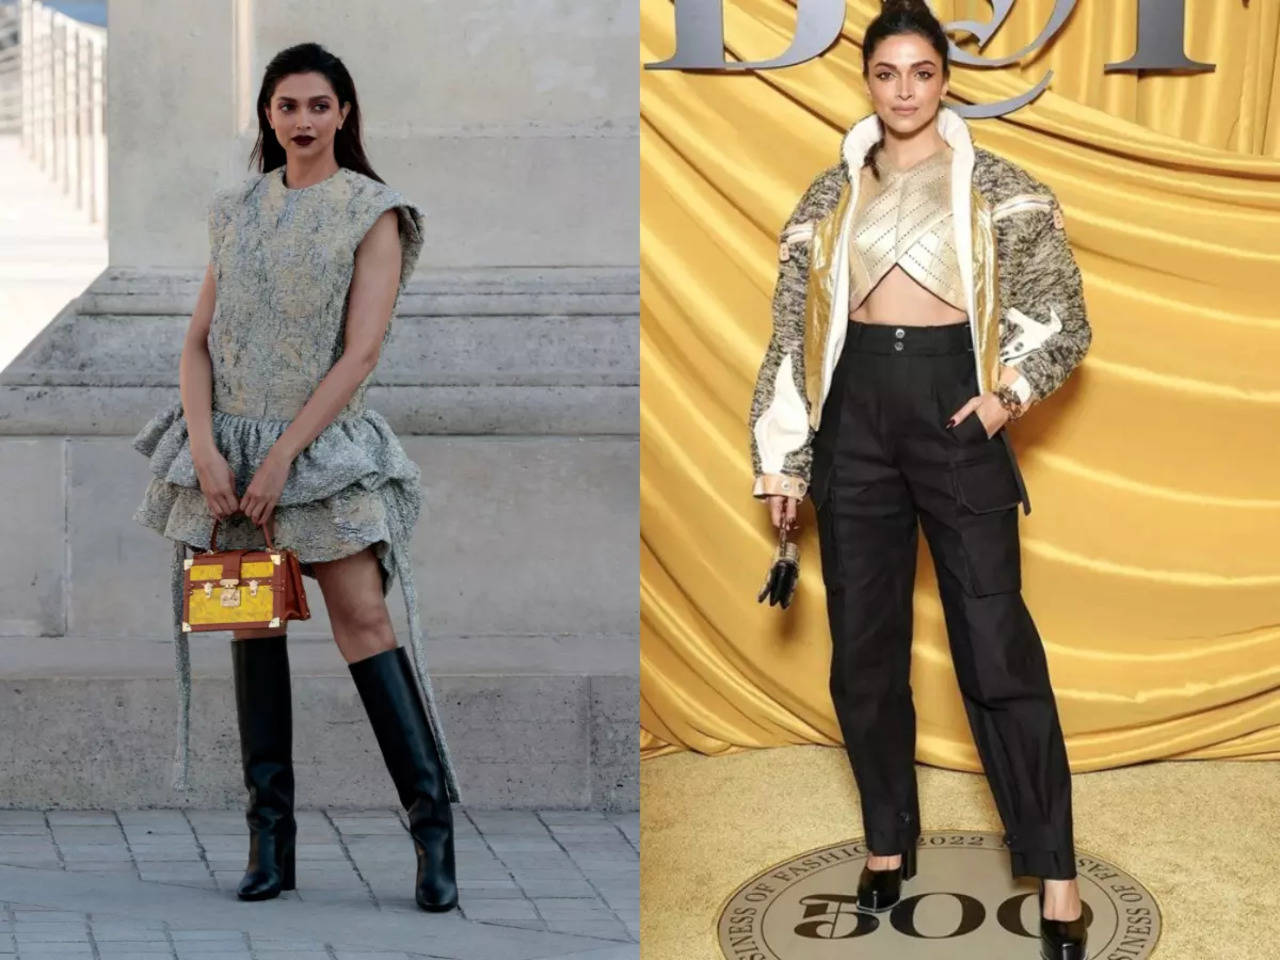 Parents attend Deepika Padukone's Paris Fashion Week event; fans comment,  'So thoughtful, they must be so proud